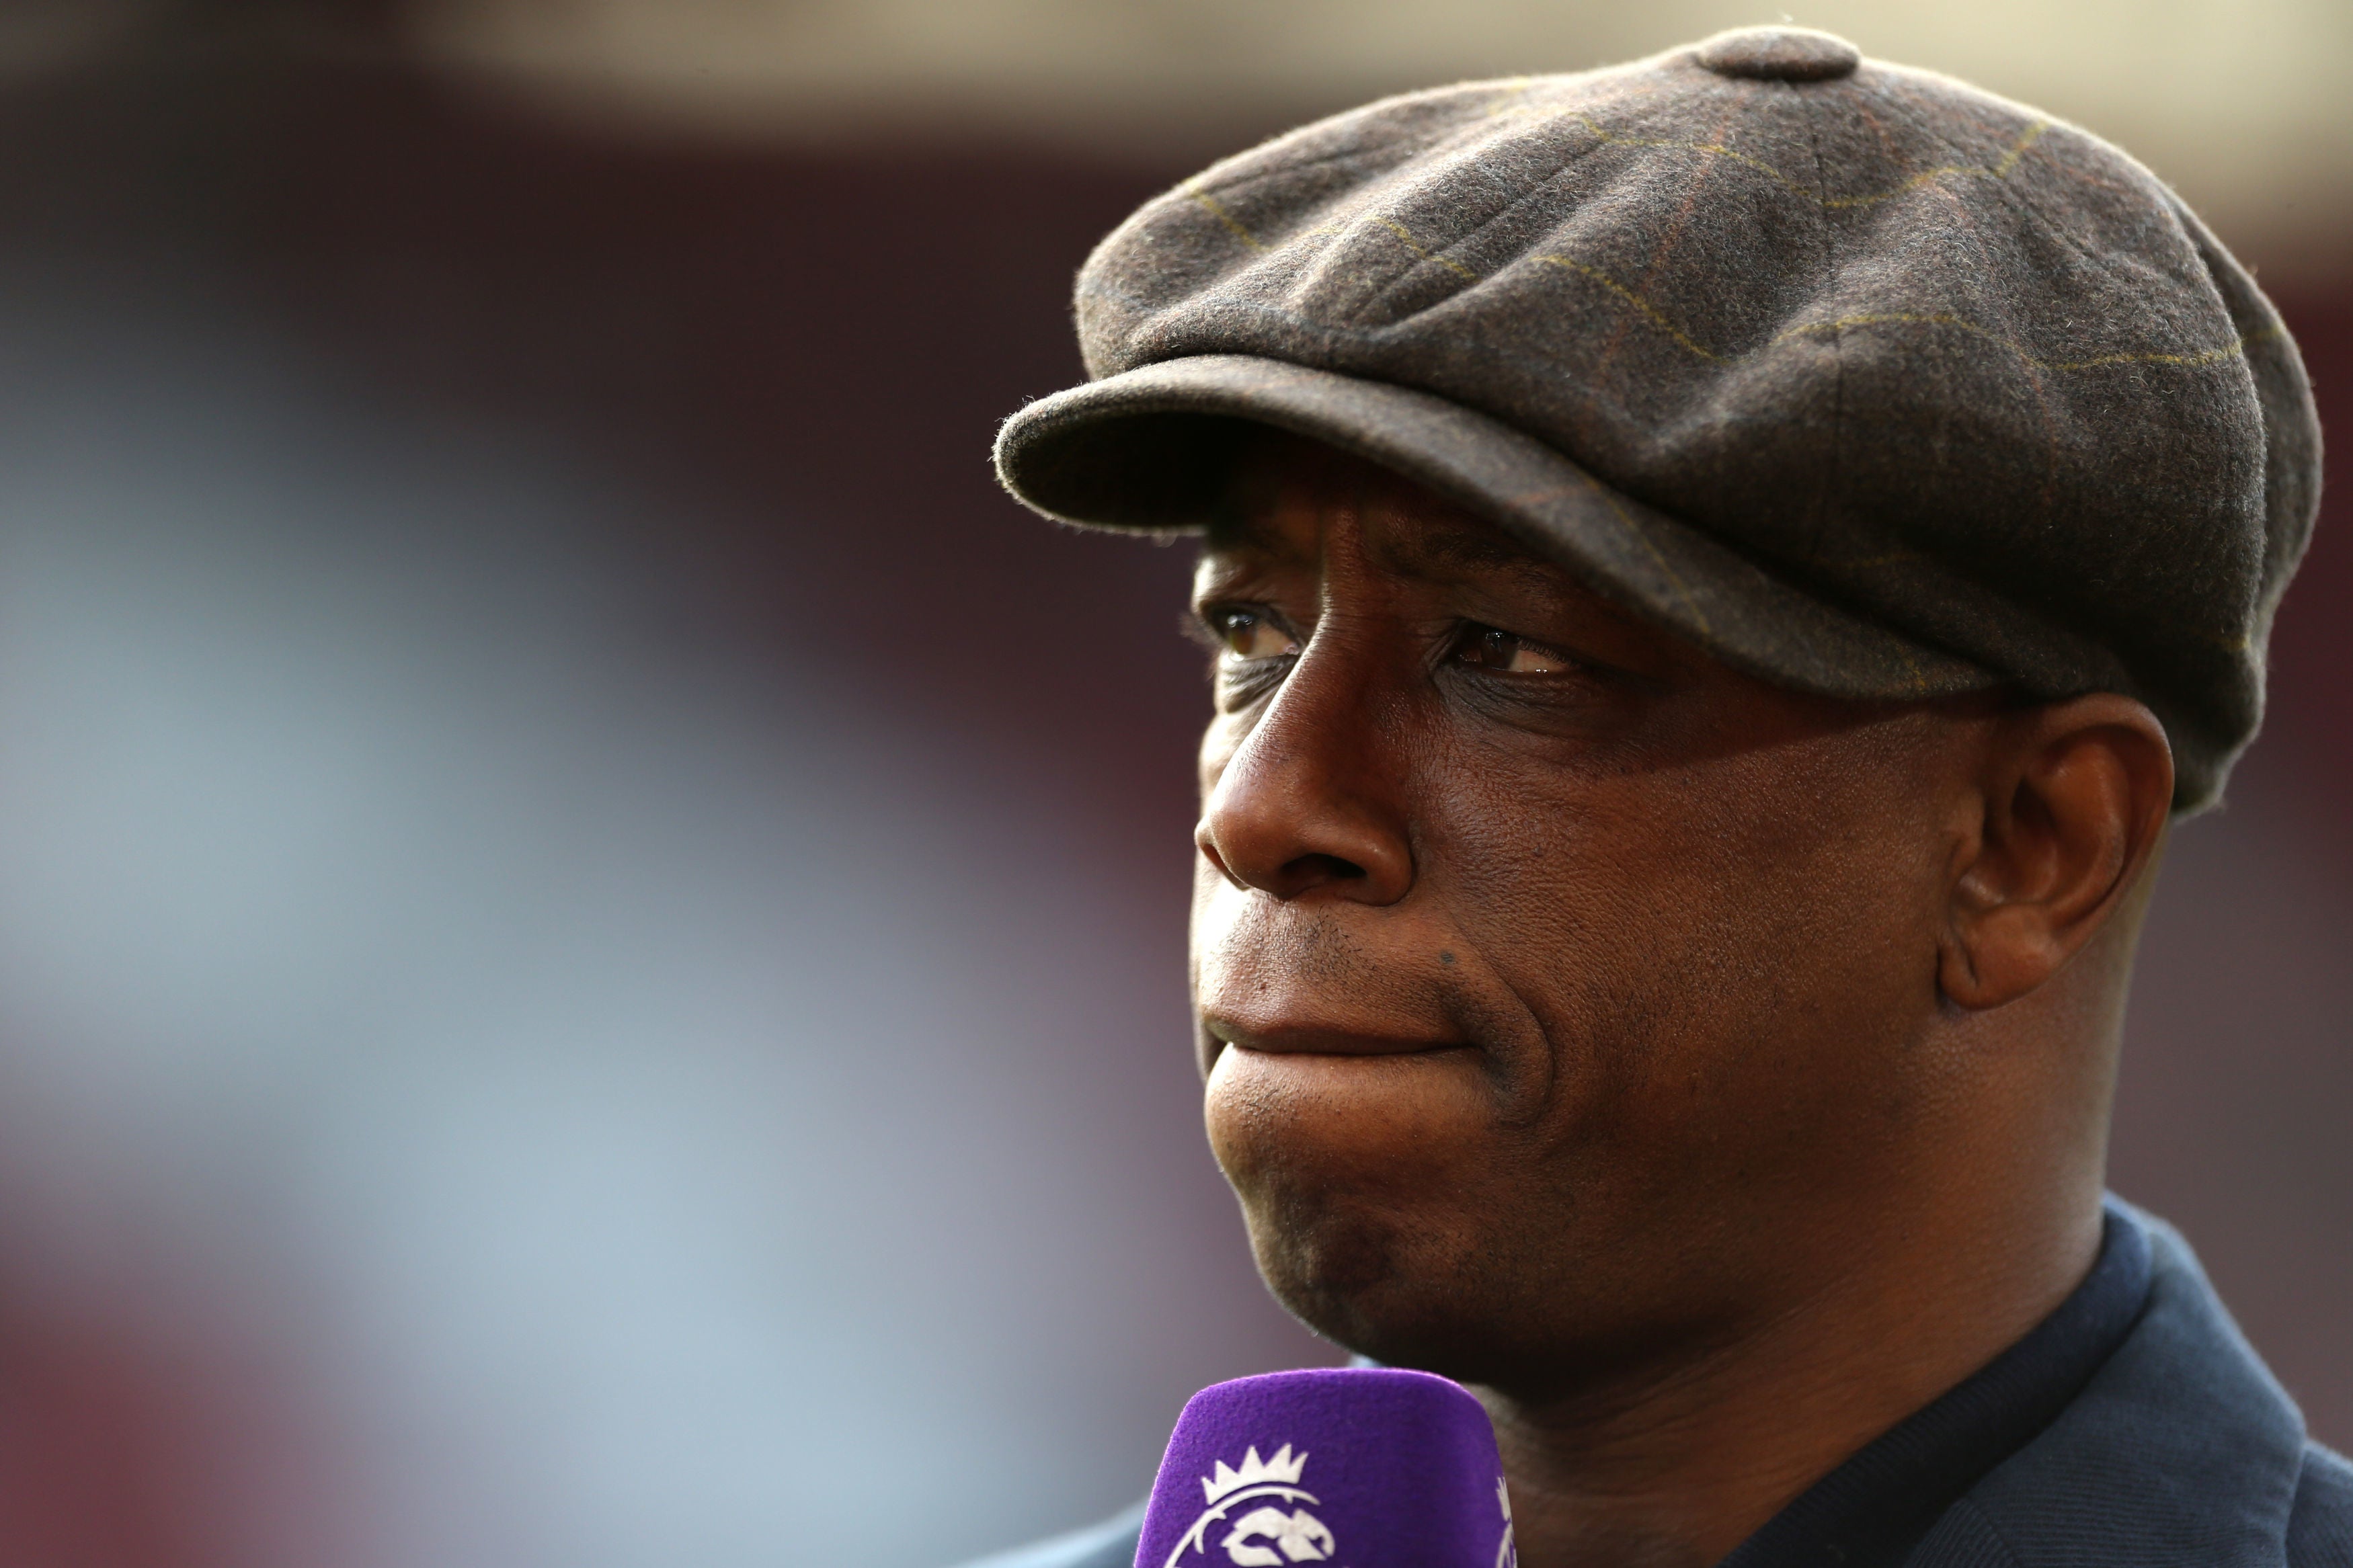 Ian Wright is a pundit for BBC Match of the Day